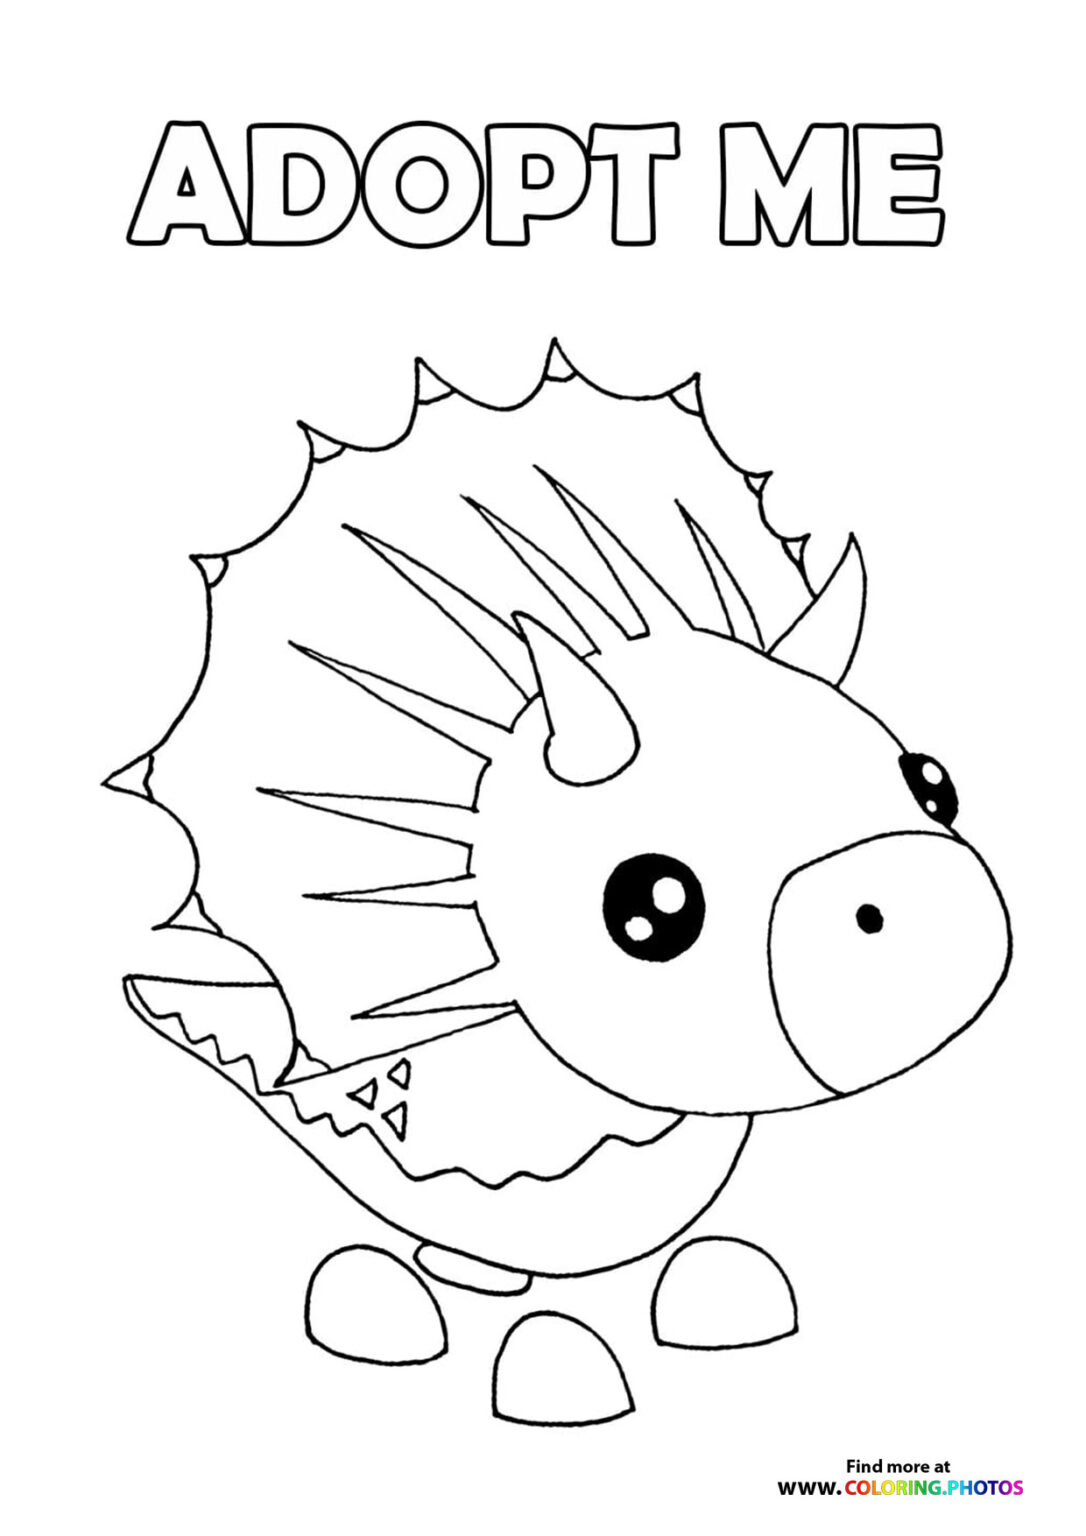 Adopt Me Unicorn Coloring Page